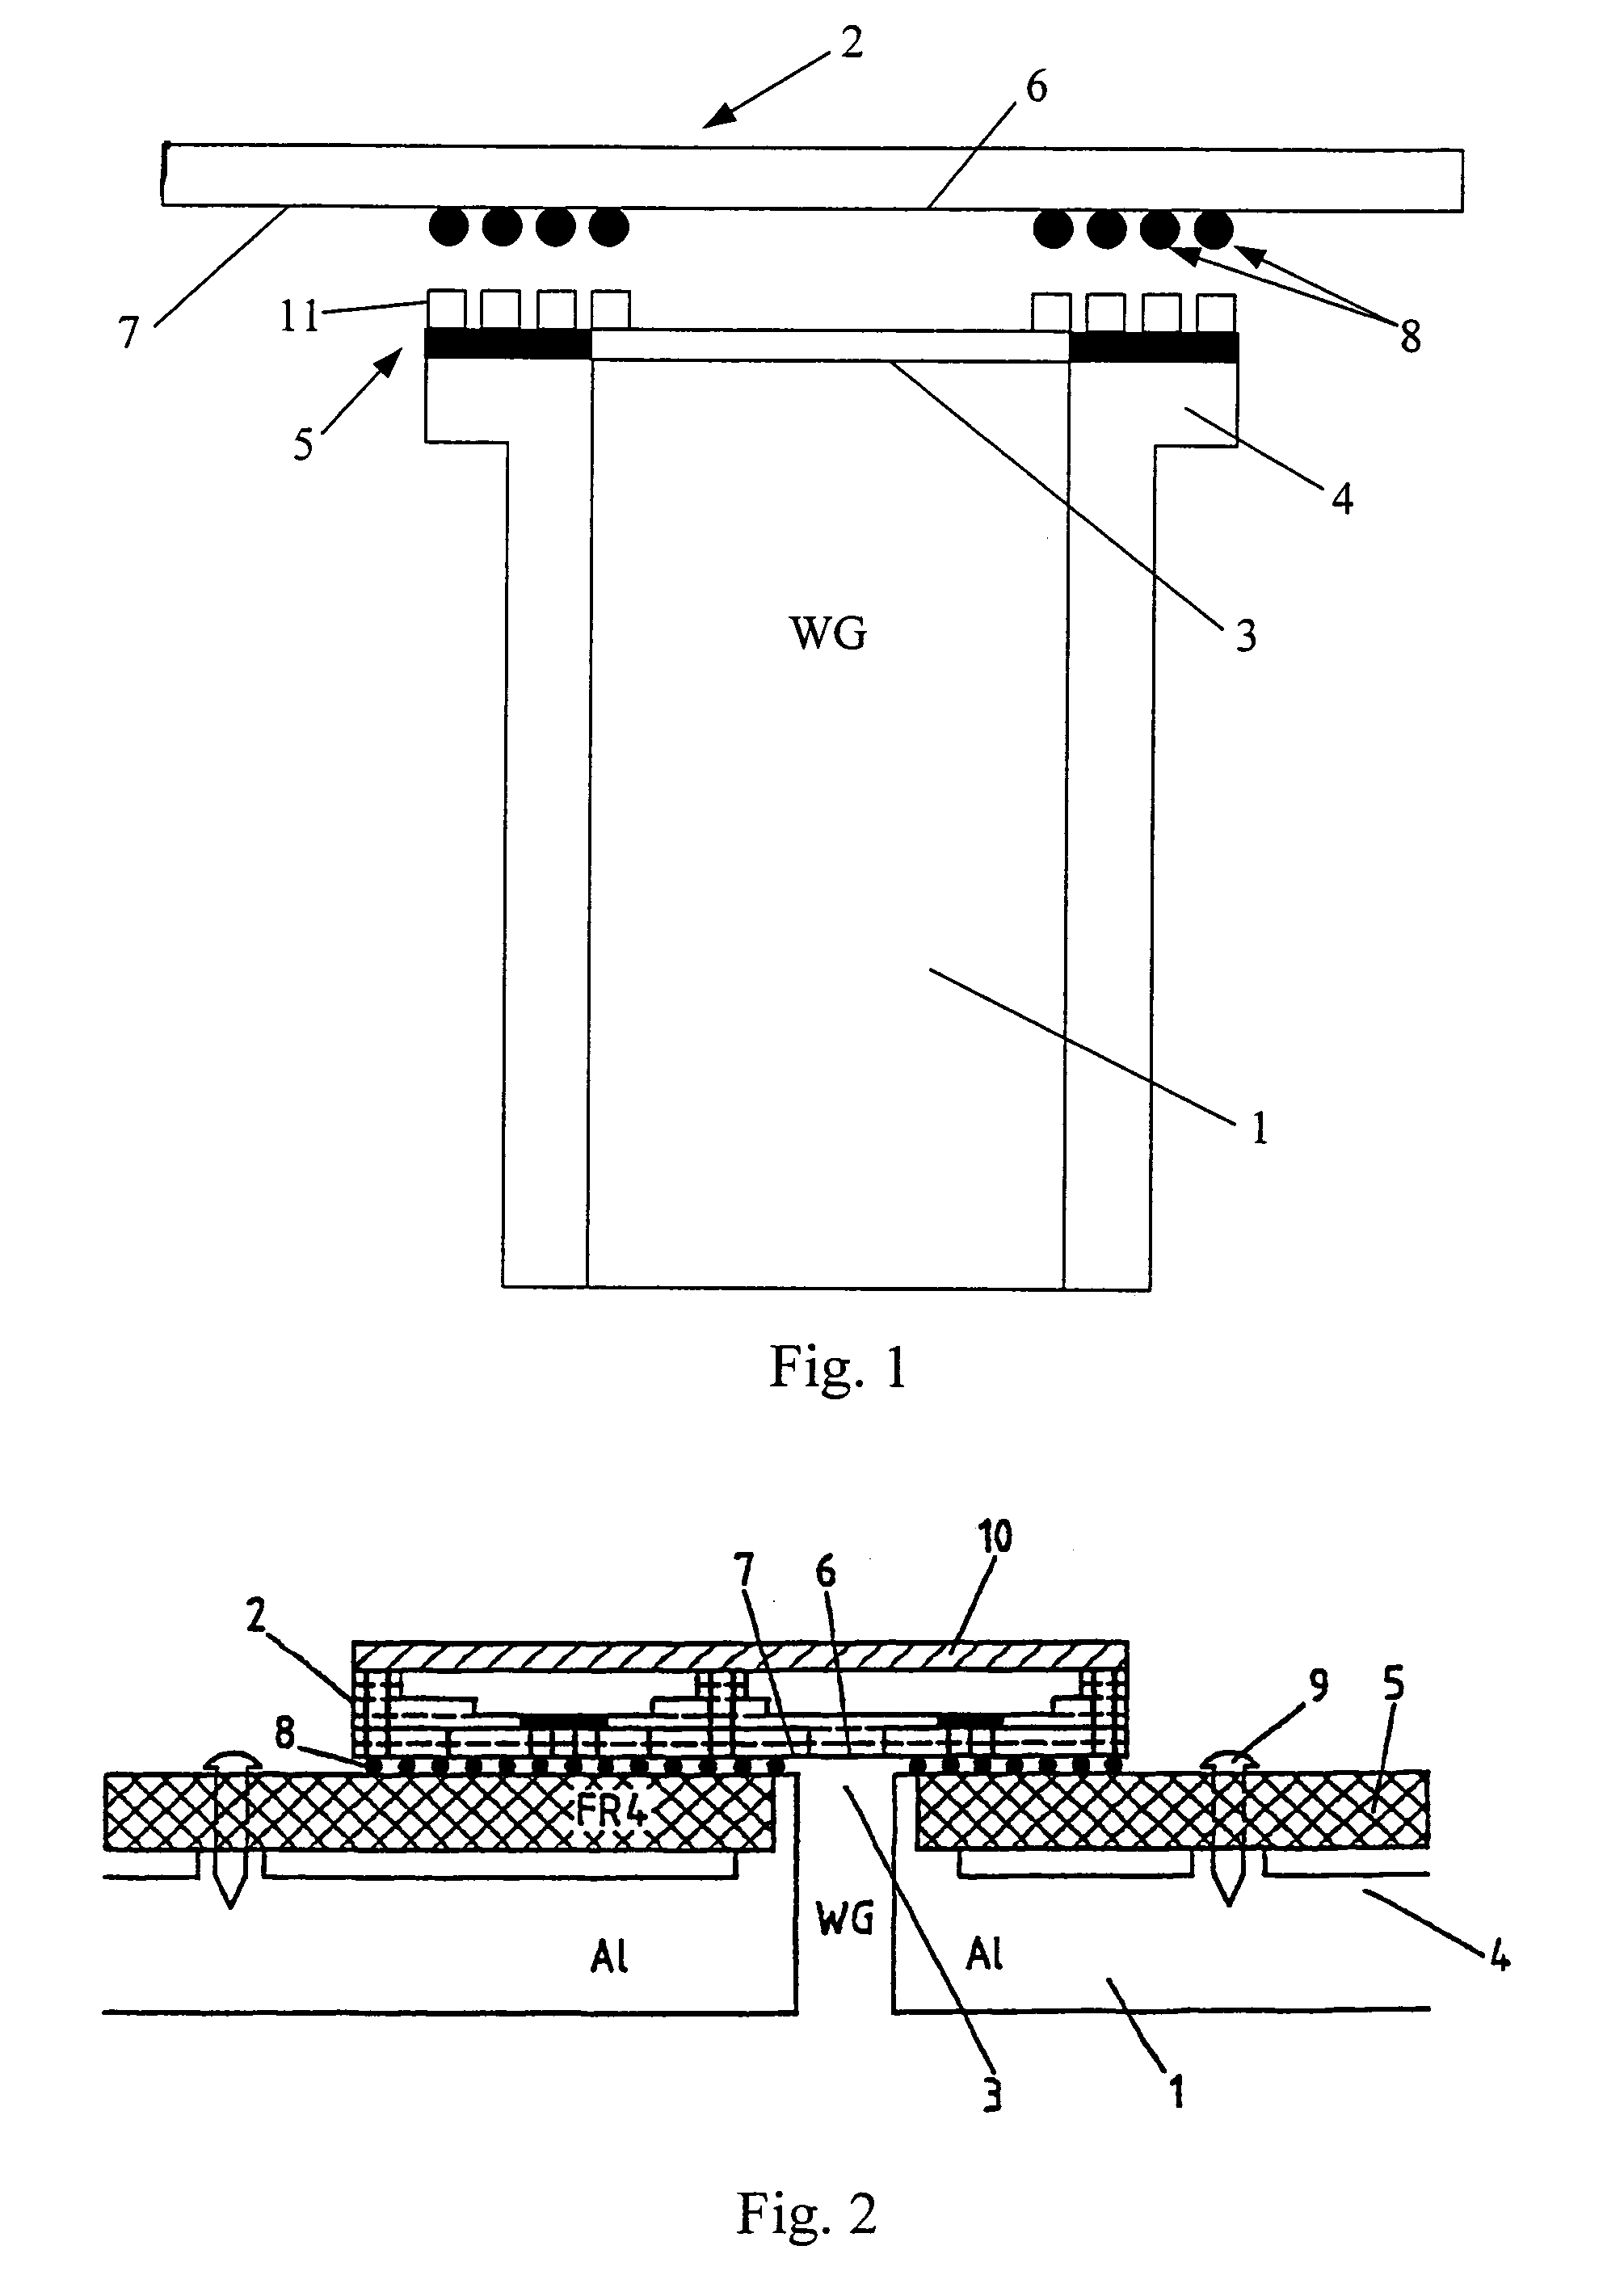 Self-aligned transition between a transmission line and a module